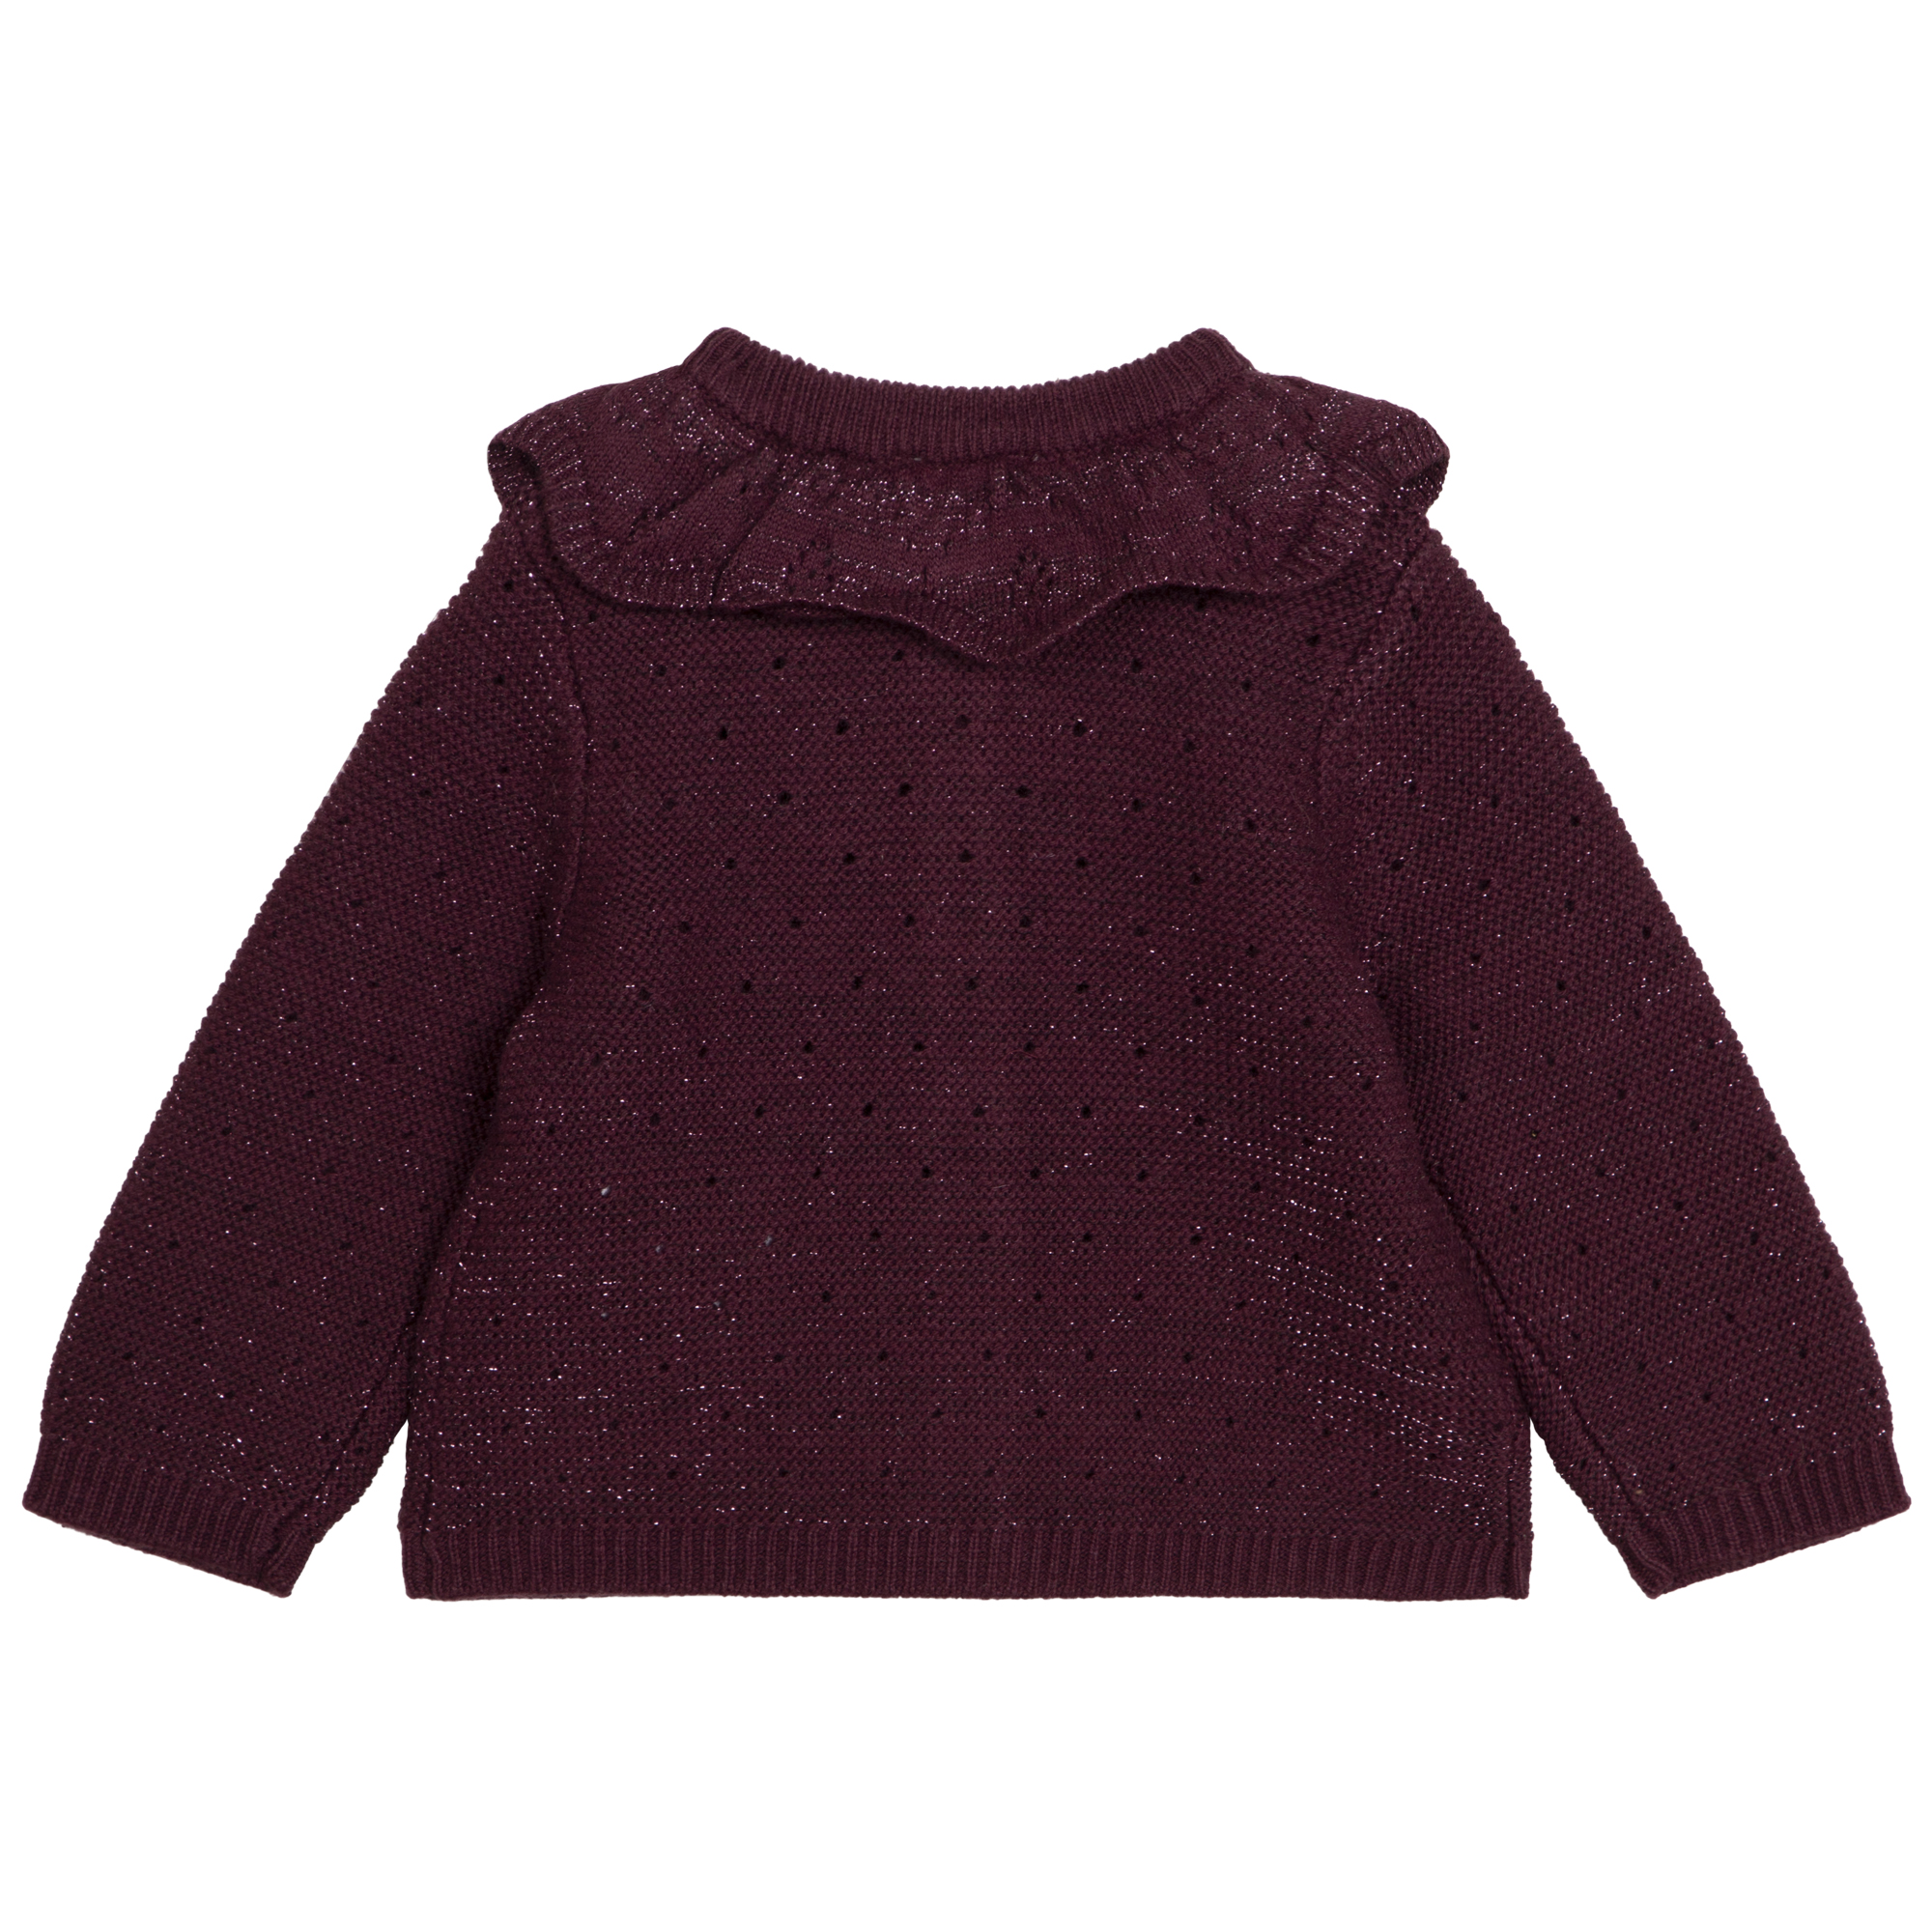 Openwork knitted cardigan CARREMENT BEAU for GIRL